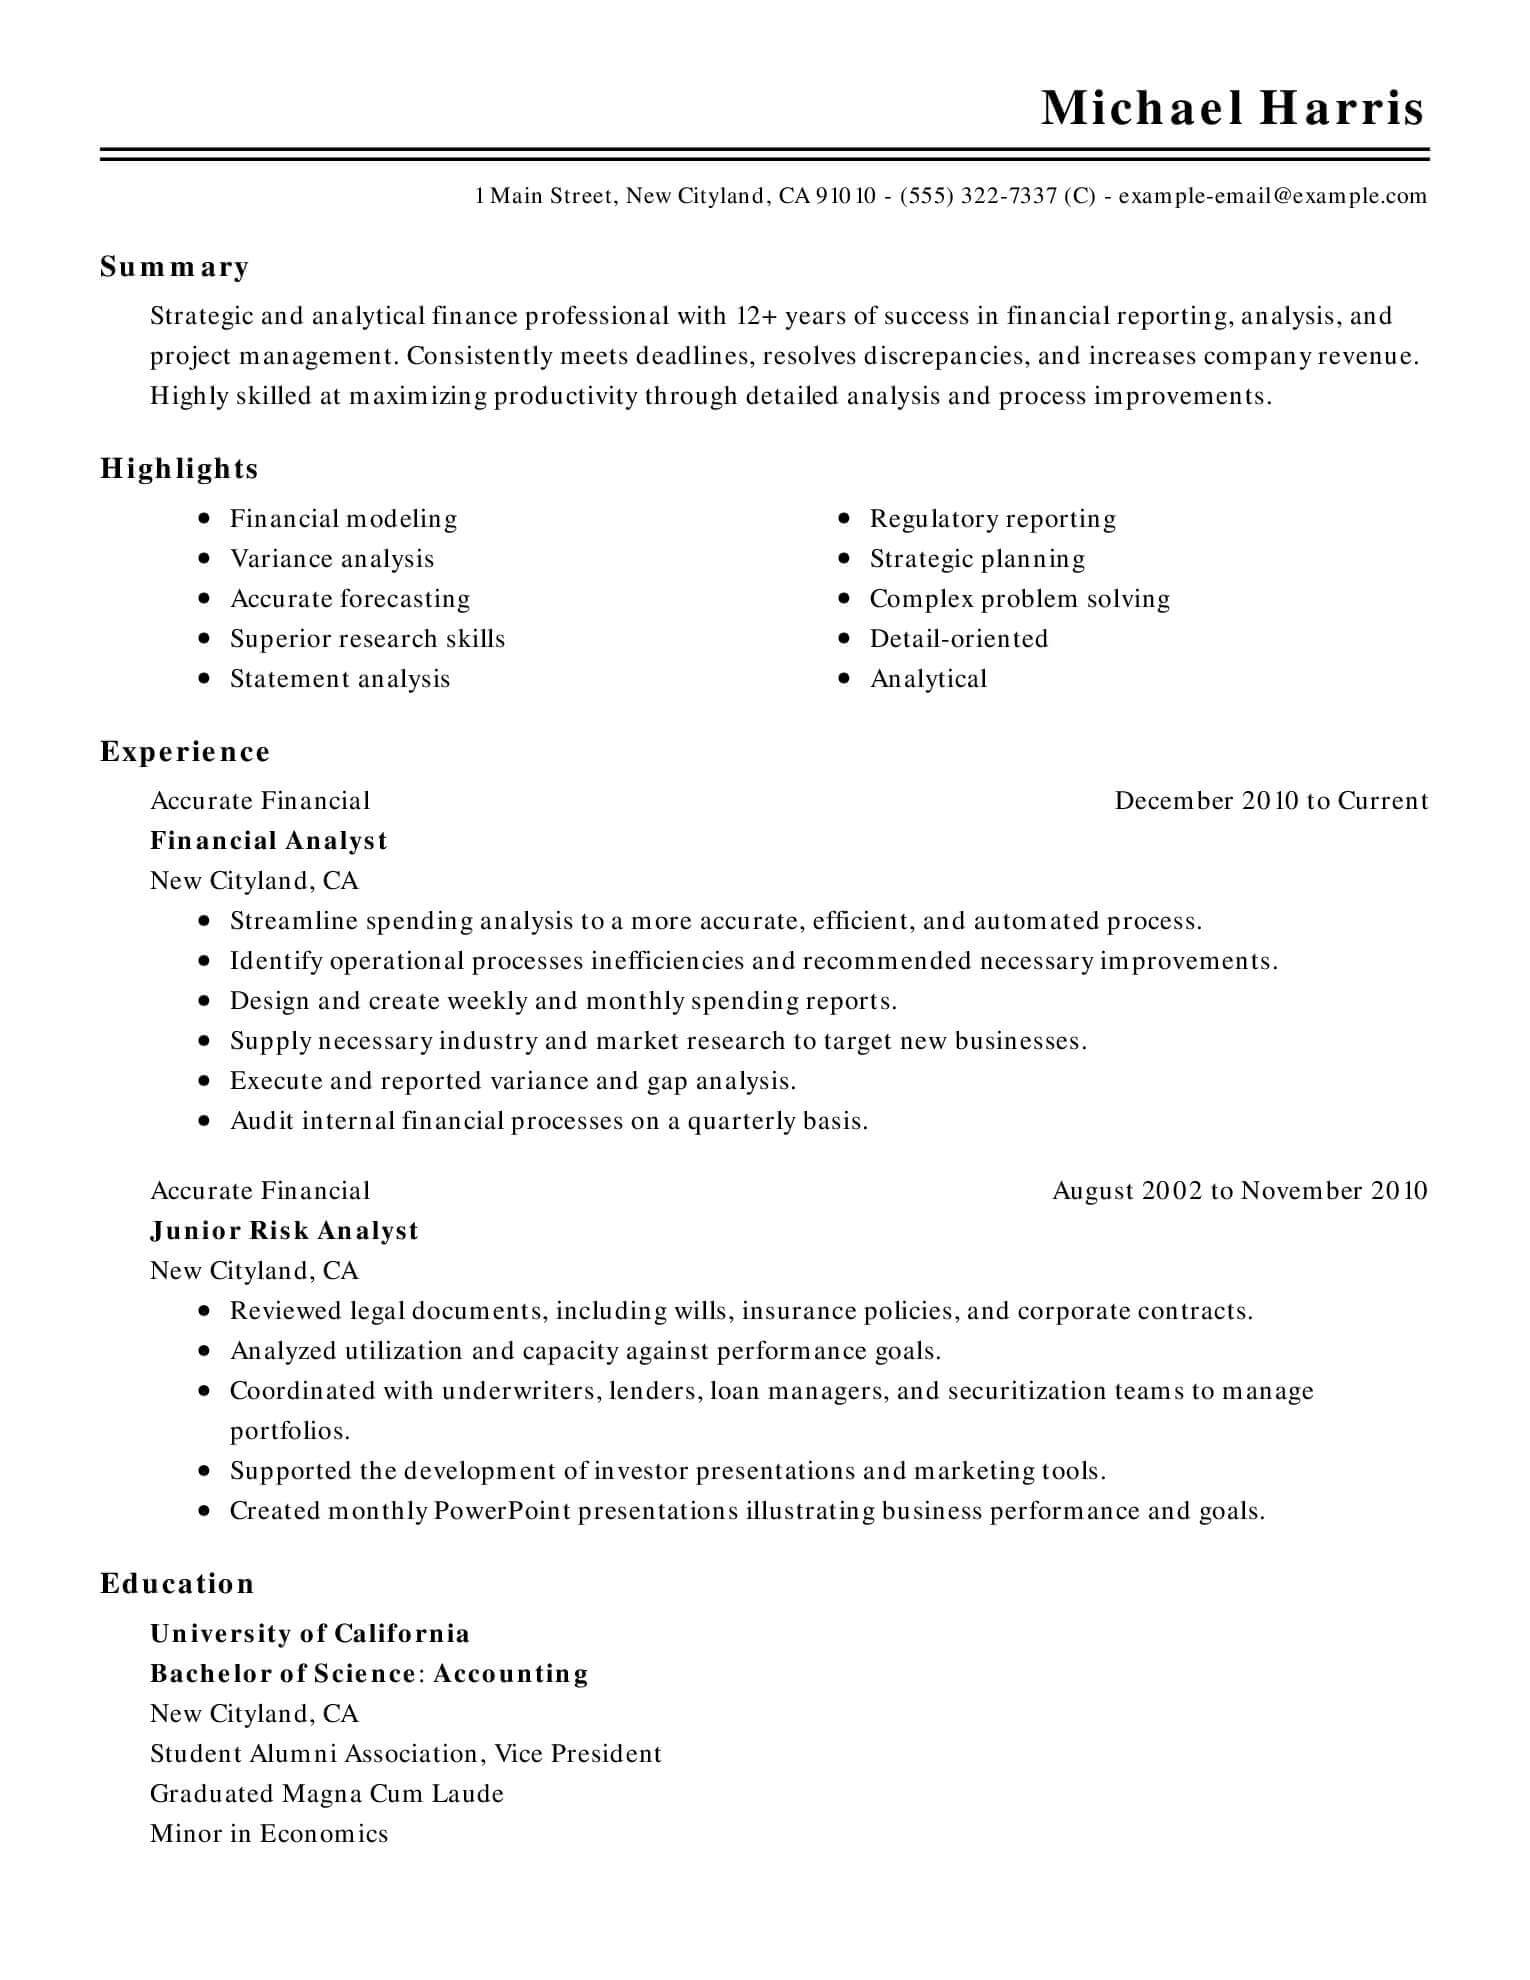 15 Of The Best Resume Templates For Microsoft Word Office Regarding How To Make A Cv Template On Microsoft Word